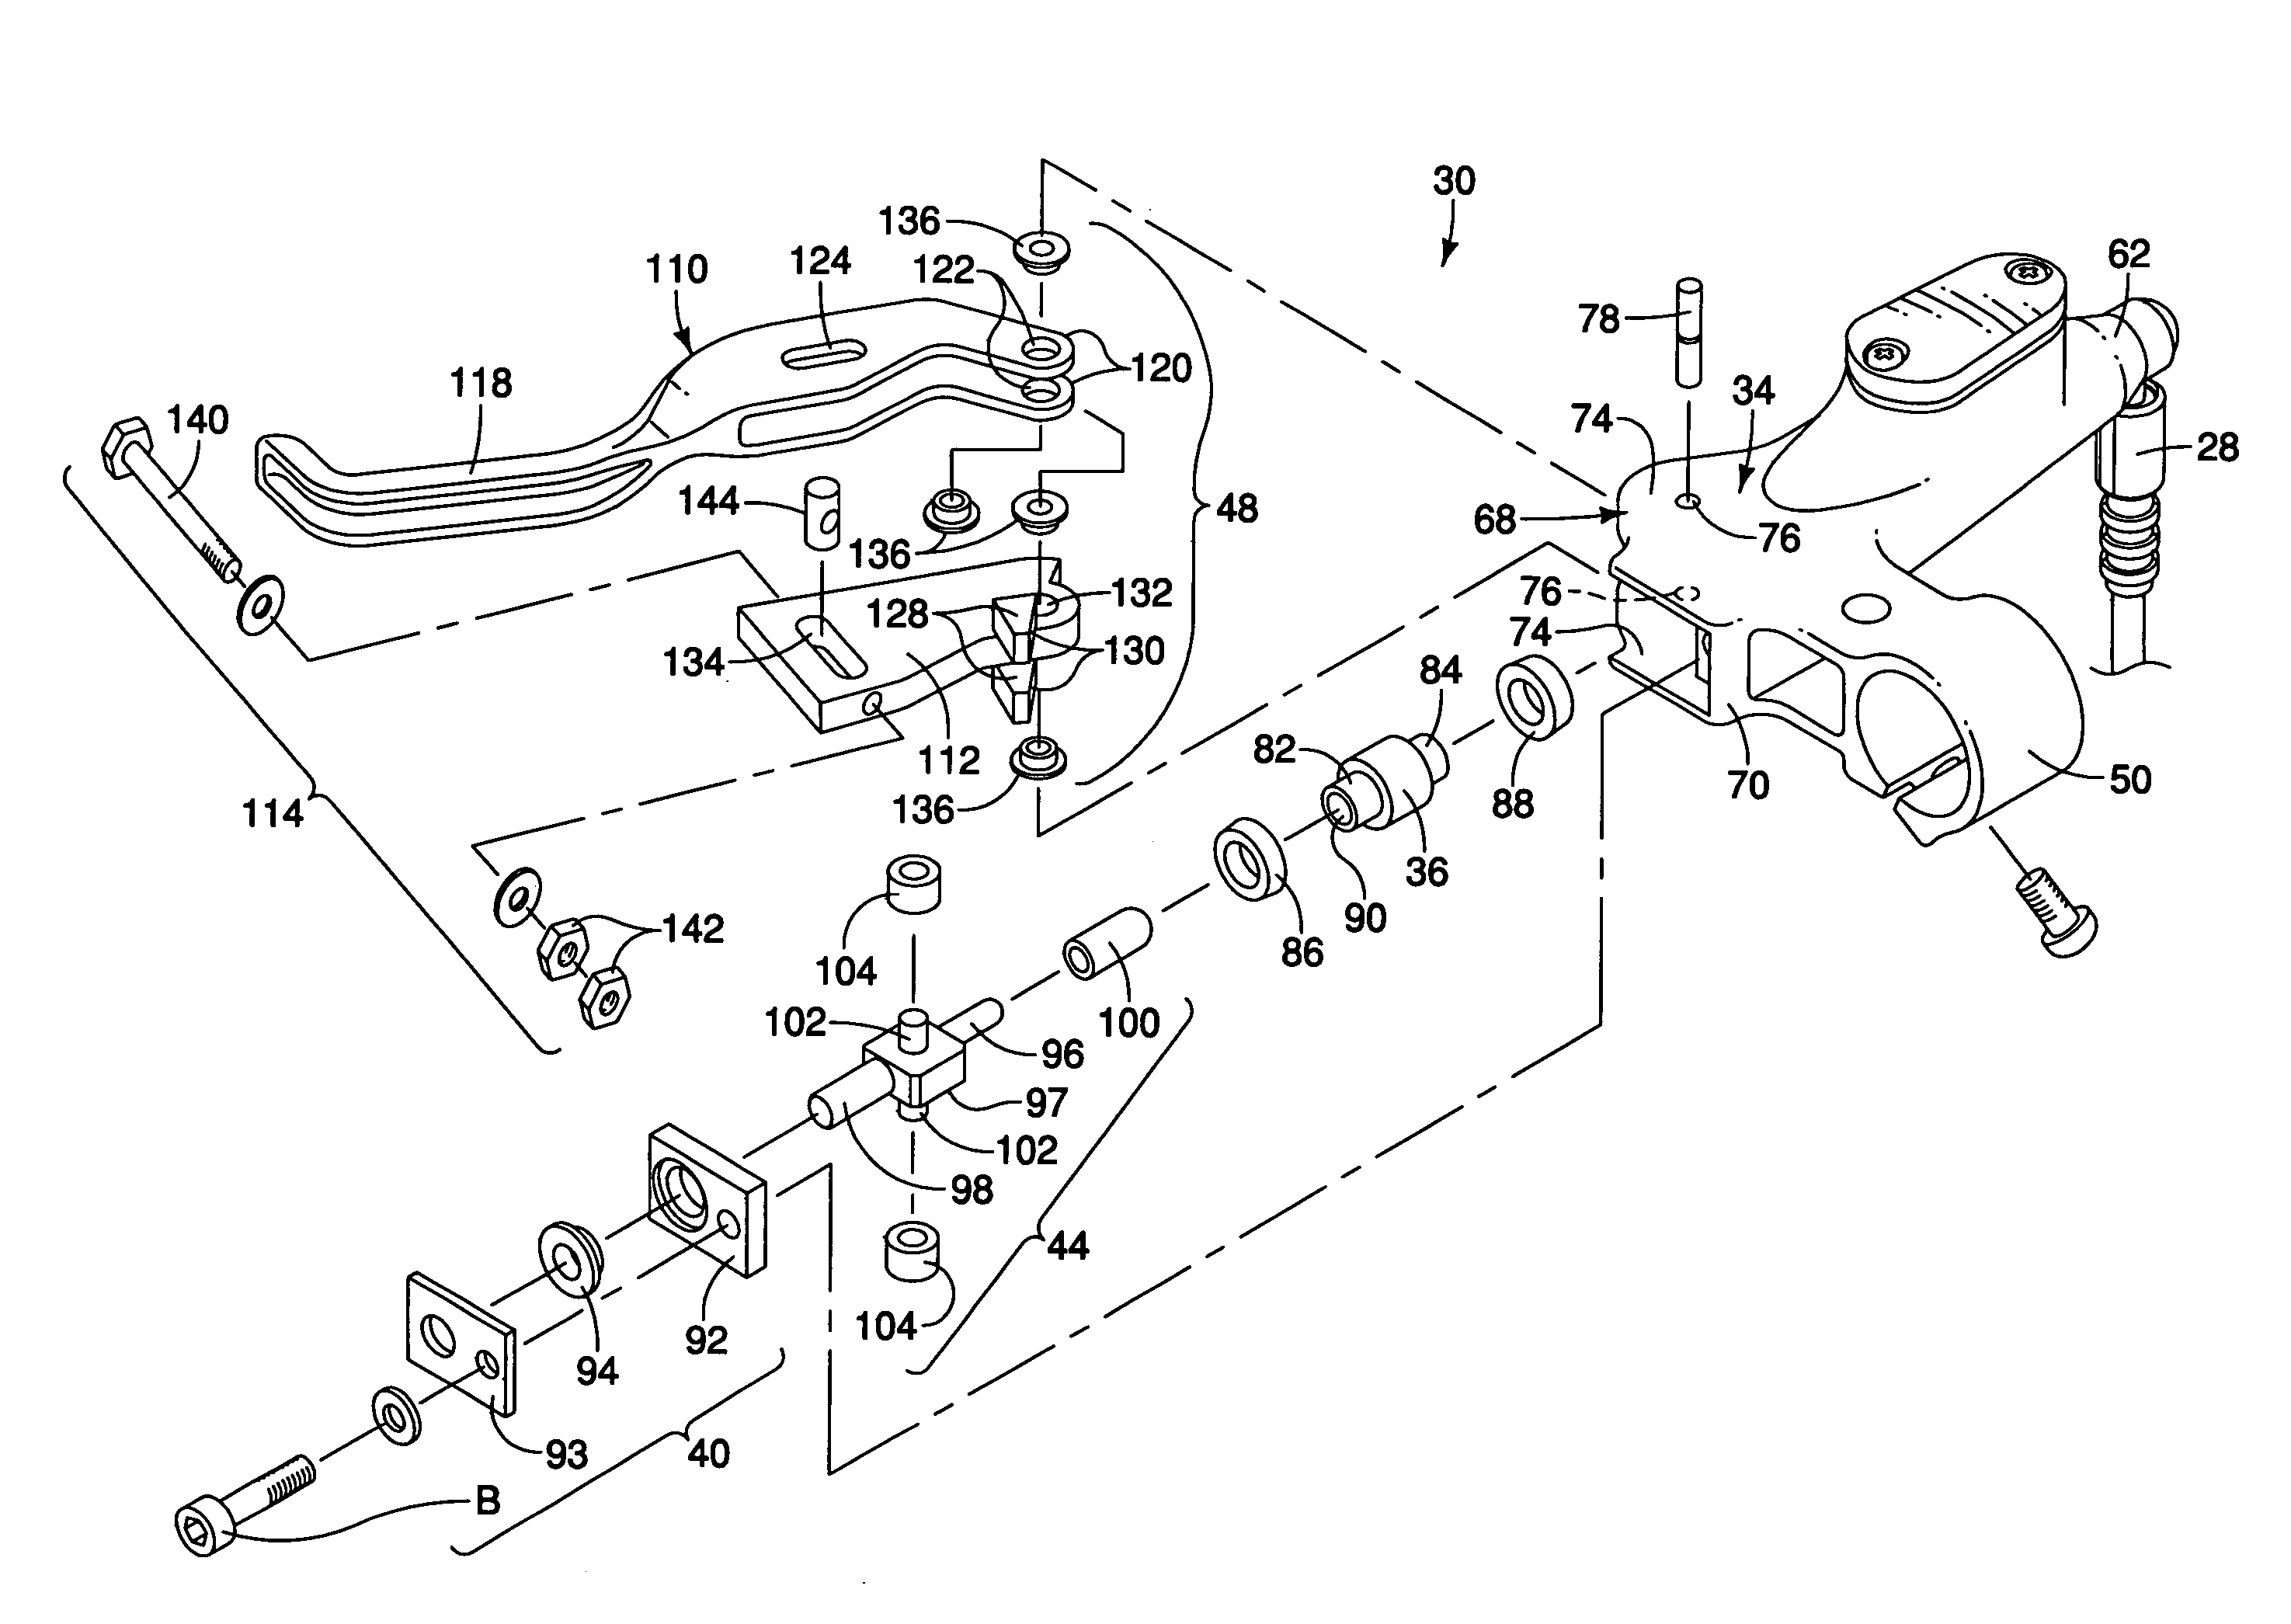 Bicycle hydraulic brake actuation device